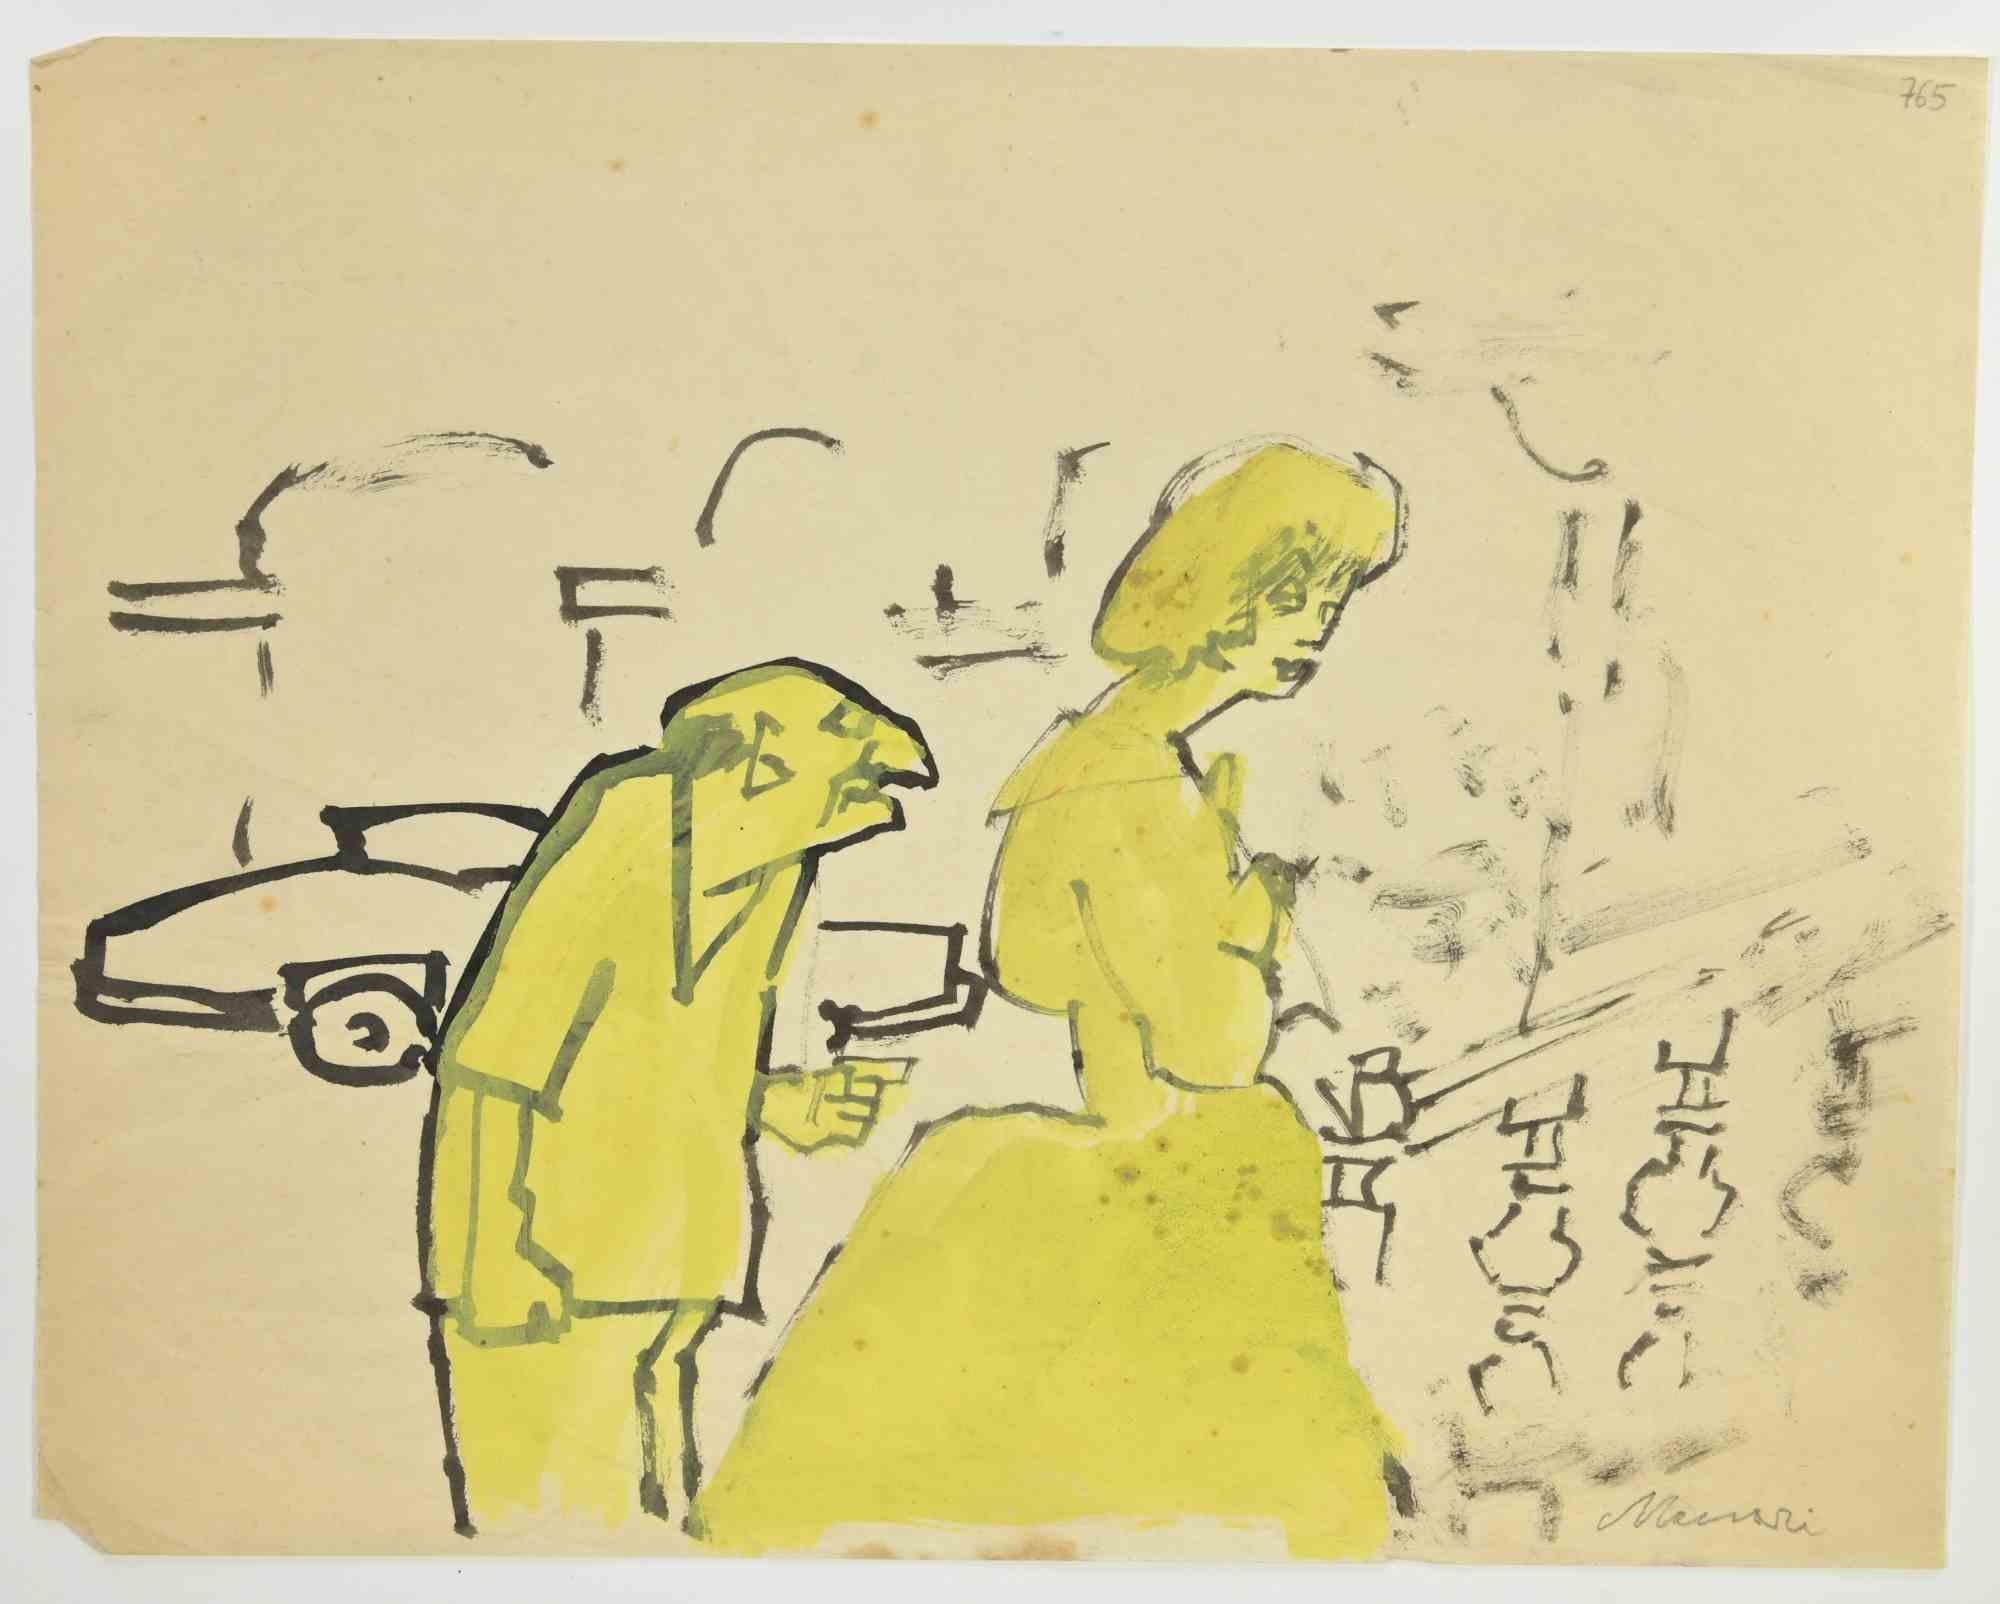 Figures is a China ink and Watercolor Drawing realized by Mino Maccari  (1924-1989) in the 1960s.

Hand-signed on the lower.

Good condition with some folding, and a small cut on the lower left.

Mino Maccari (Siena, 1924-Rome, June 16, 1989) was an